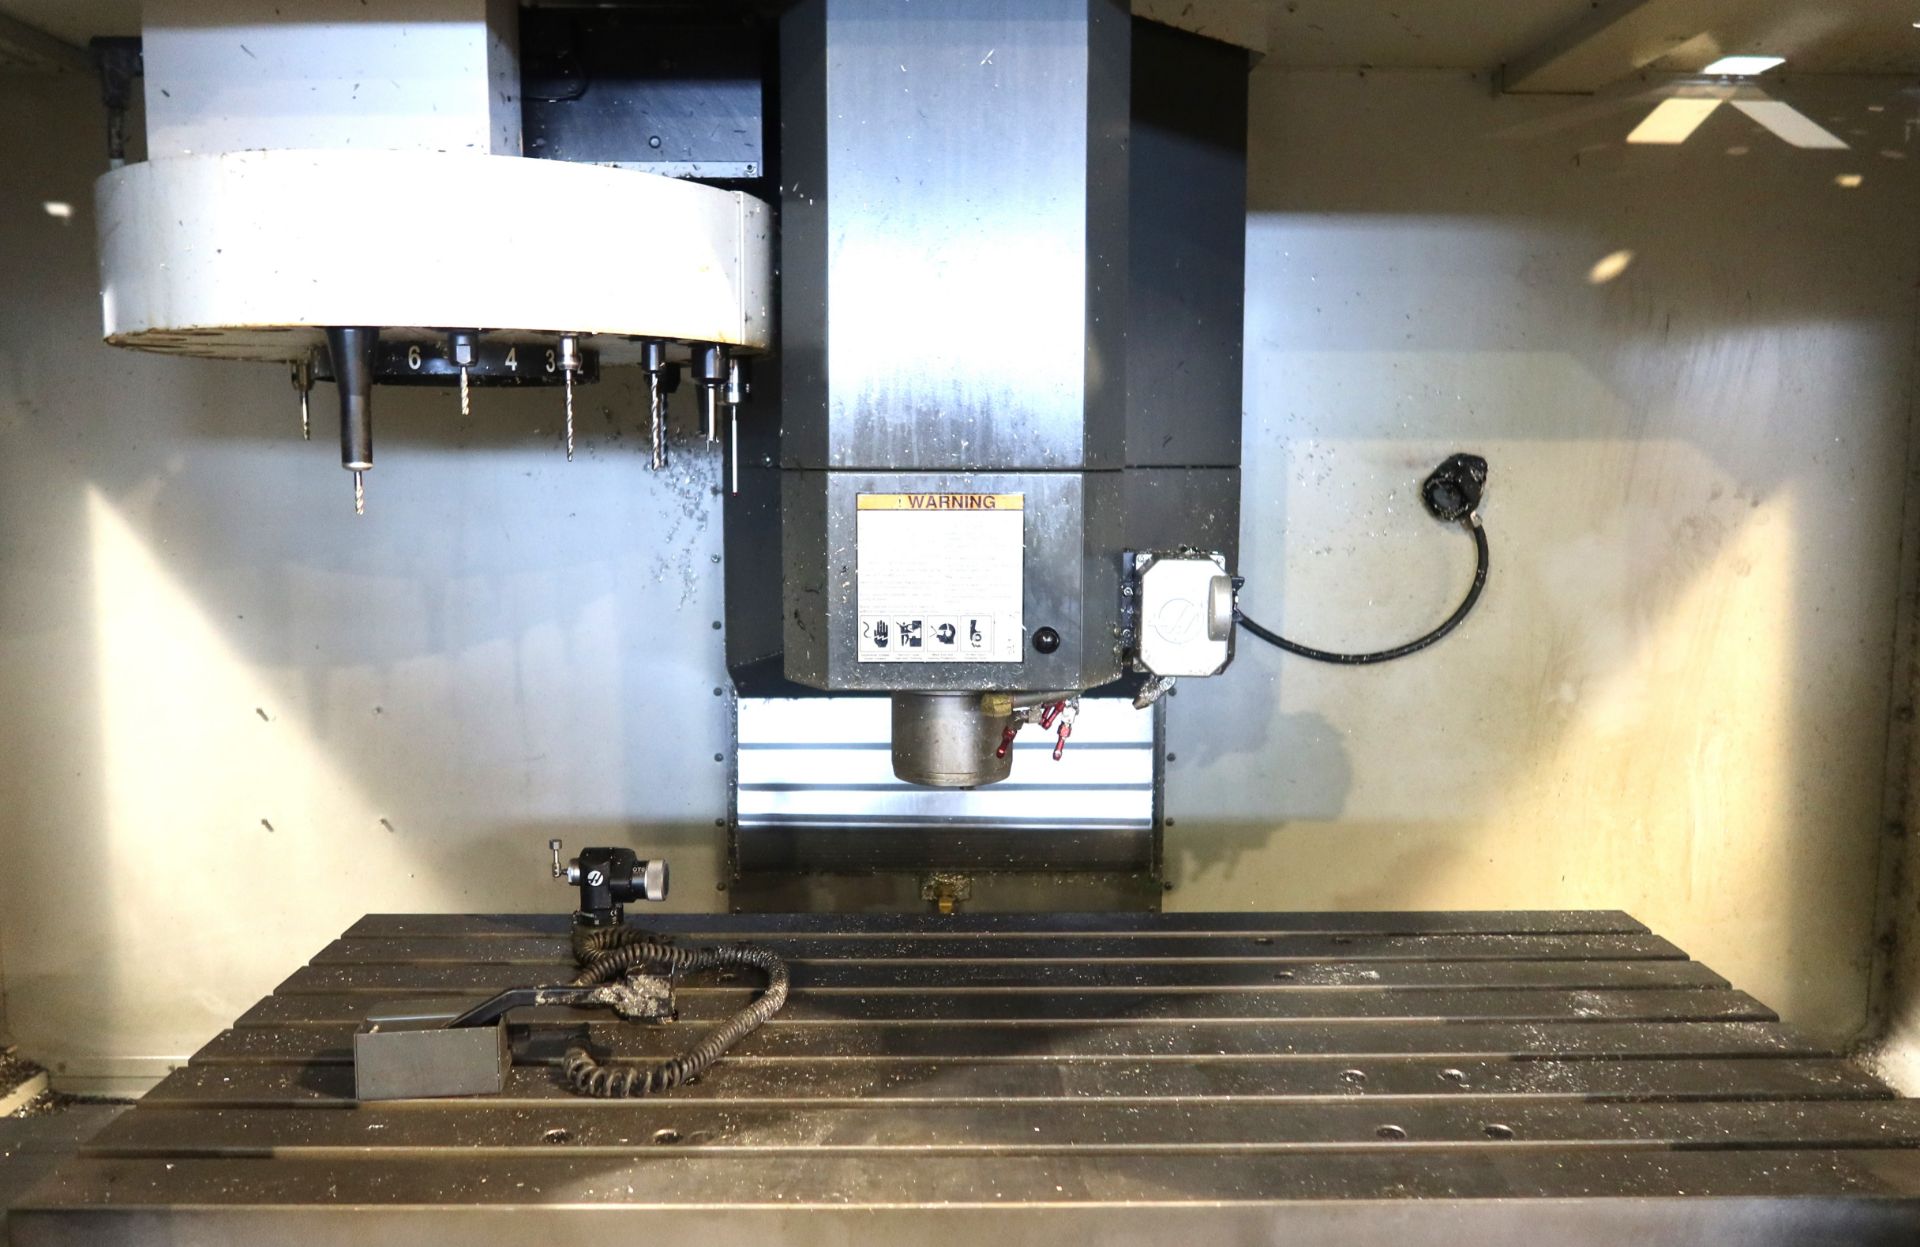 HAAS VF3-YT CNC 4-AXIS PRECISION VERTICAL MACHINING CENTER, S/N 1124918, NEW 2015 - Image 3 of 12